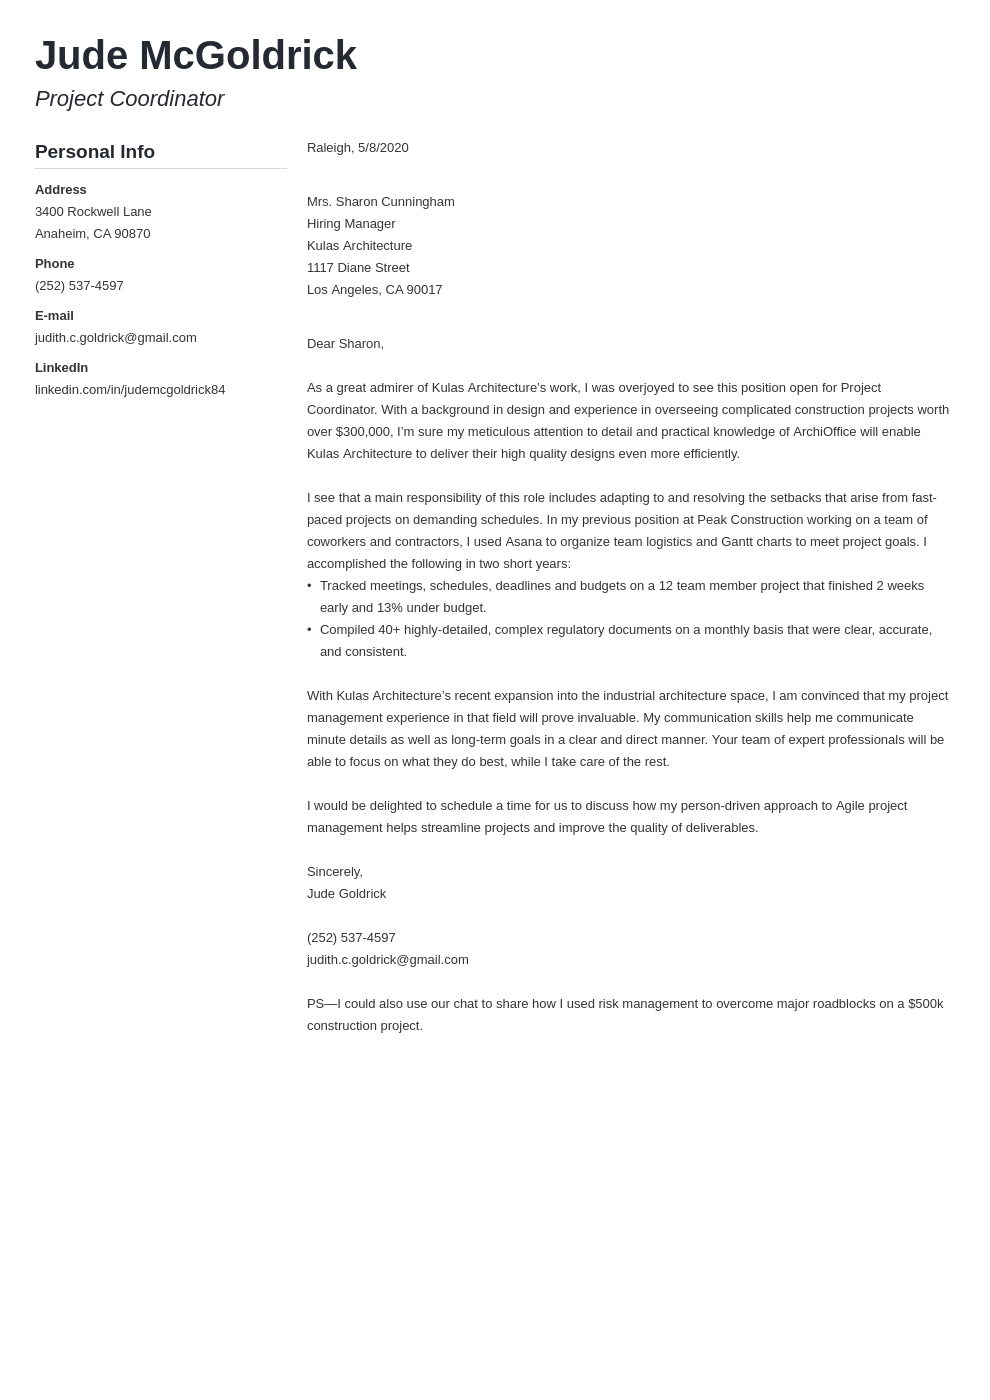 application letter for project manager